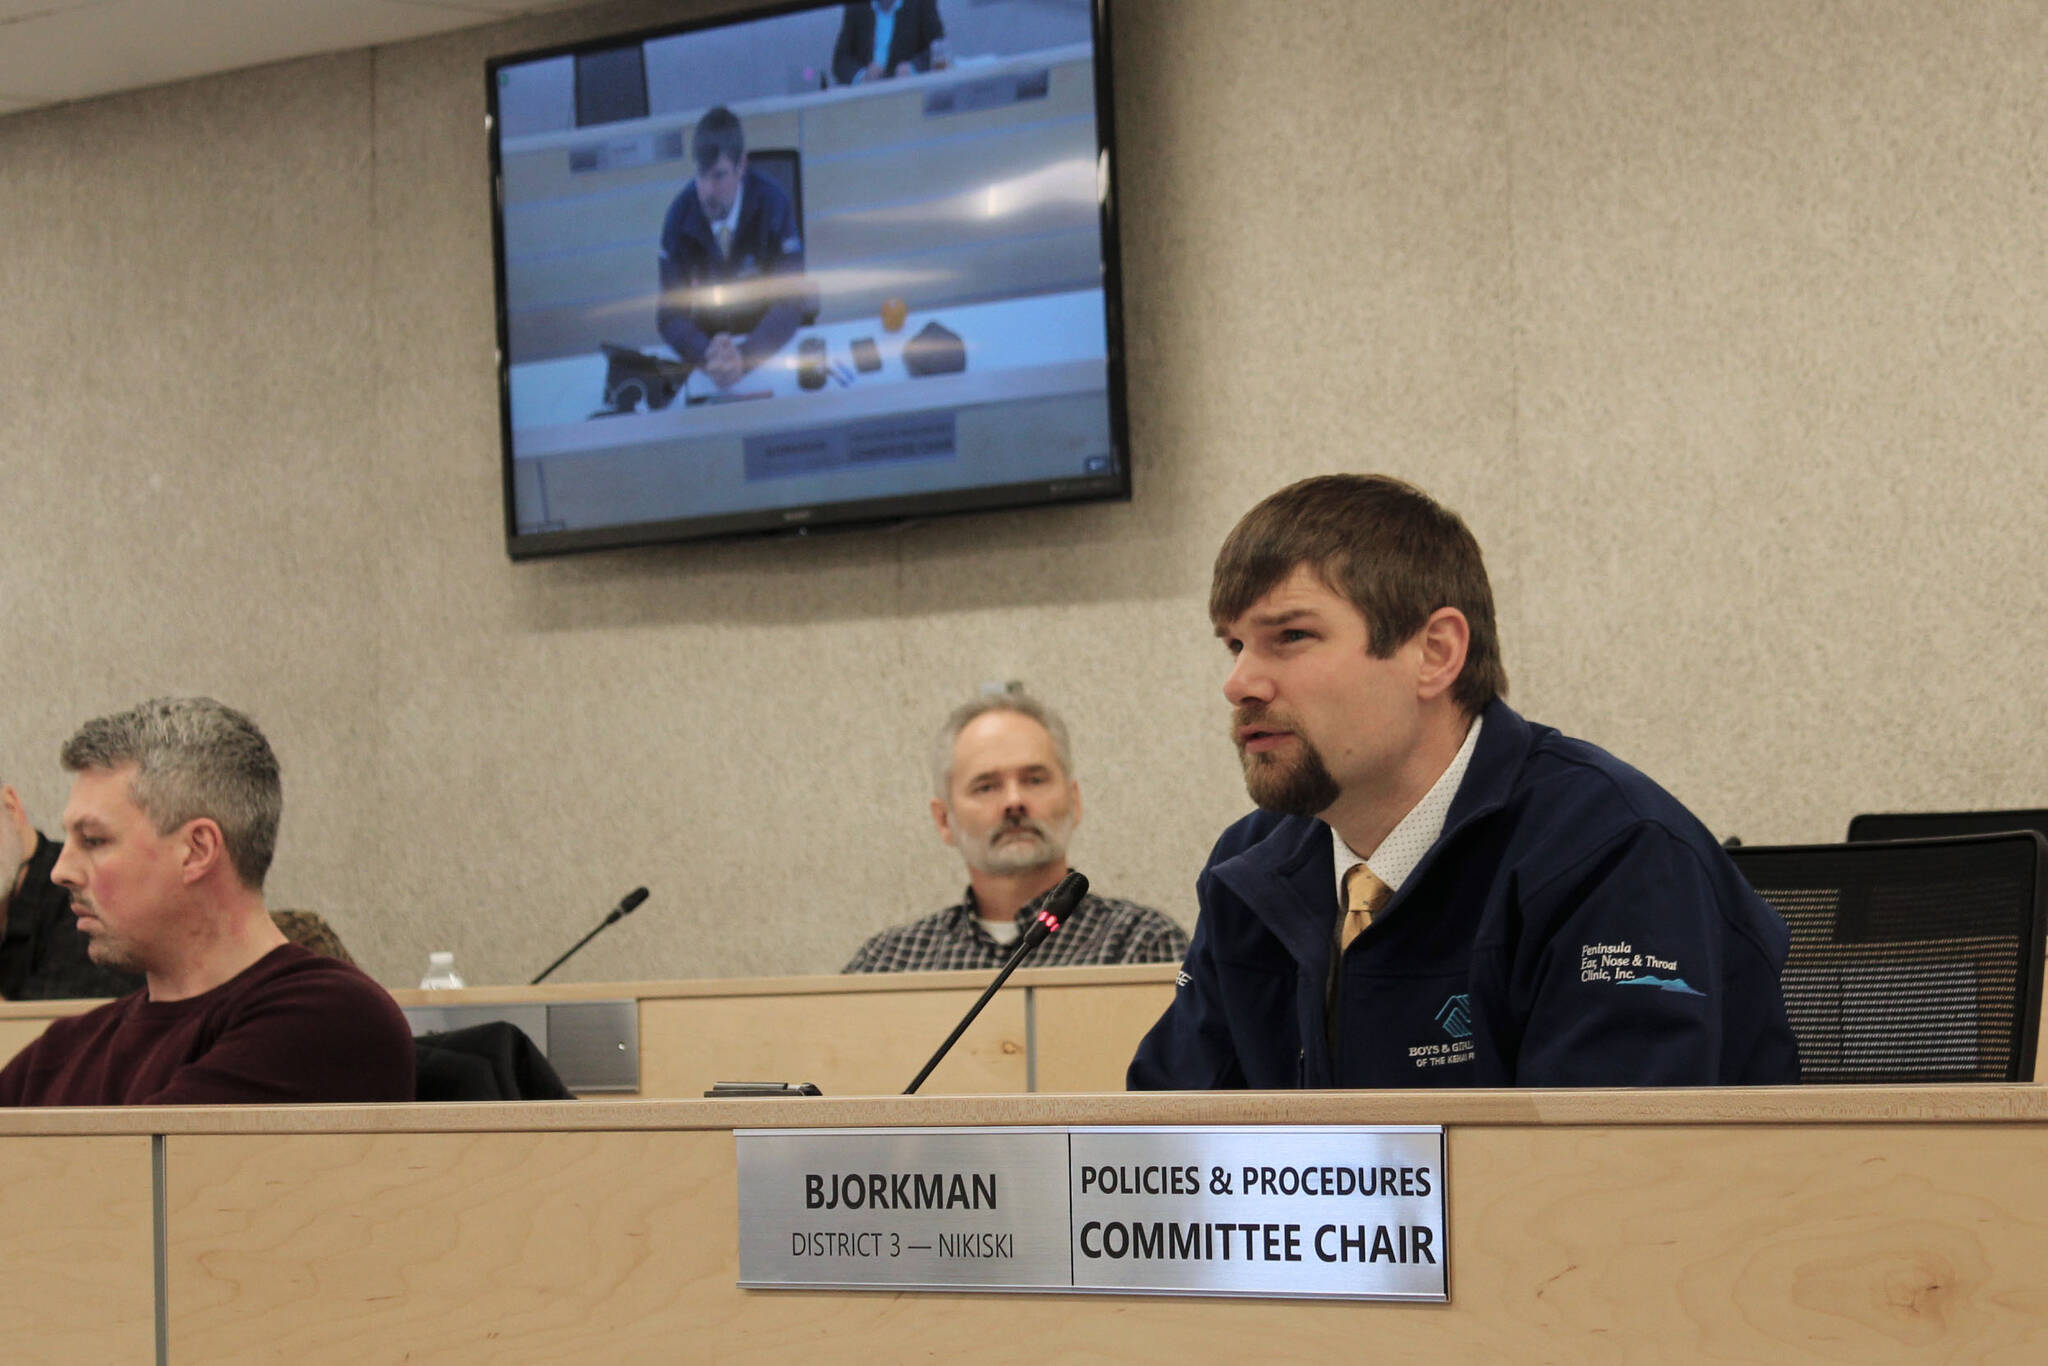 Jesse Bjorkman speaks at a borough work session on Tuesday, March 2, 2021, in Soldotna, Alaska. Bjorkman submitted a letter of resignation to the assembly after being elected to represent the northern Kenai Peninsula in the Alaska State Senate. (Photo by Ashlyn O’Hara/Peninsula Clarion)